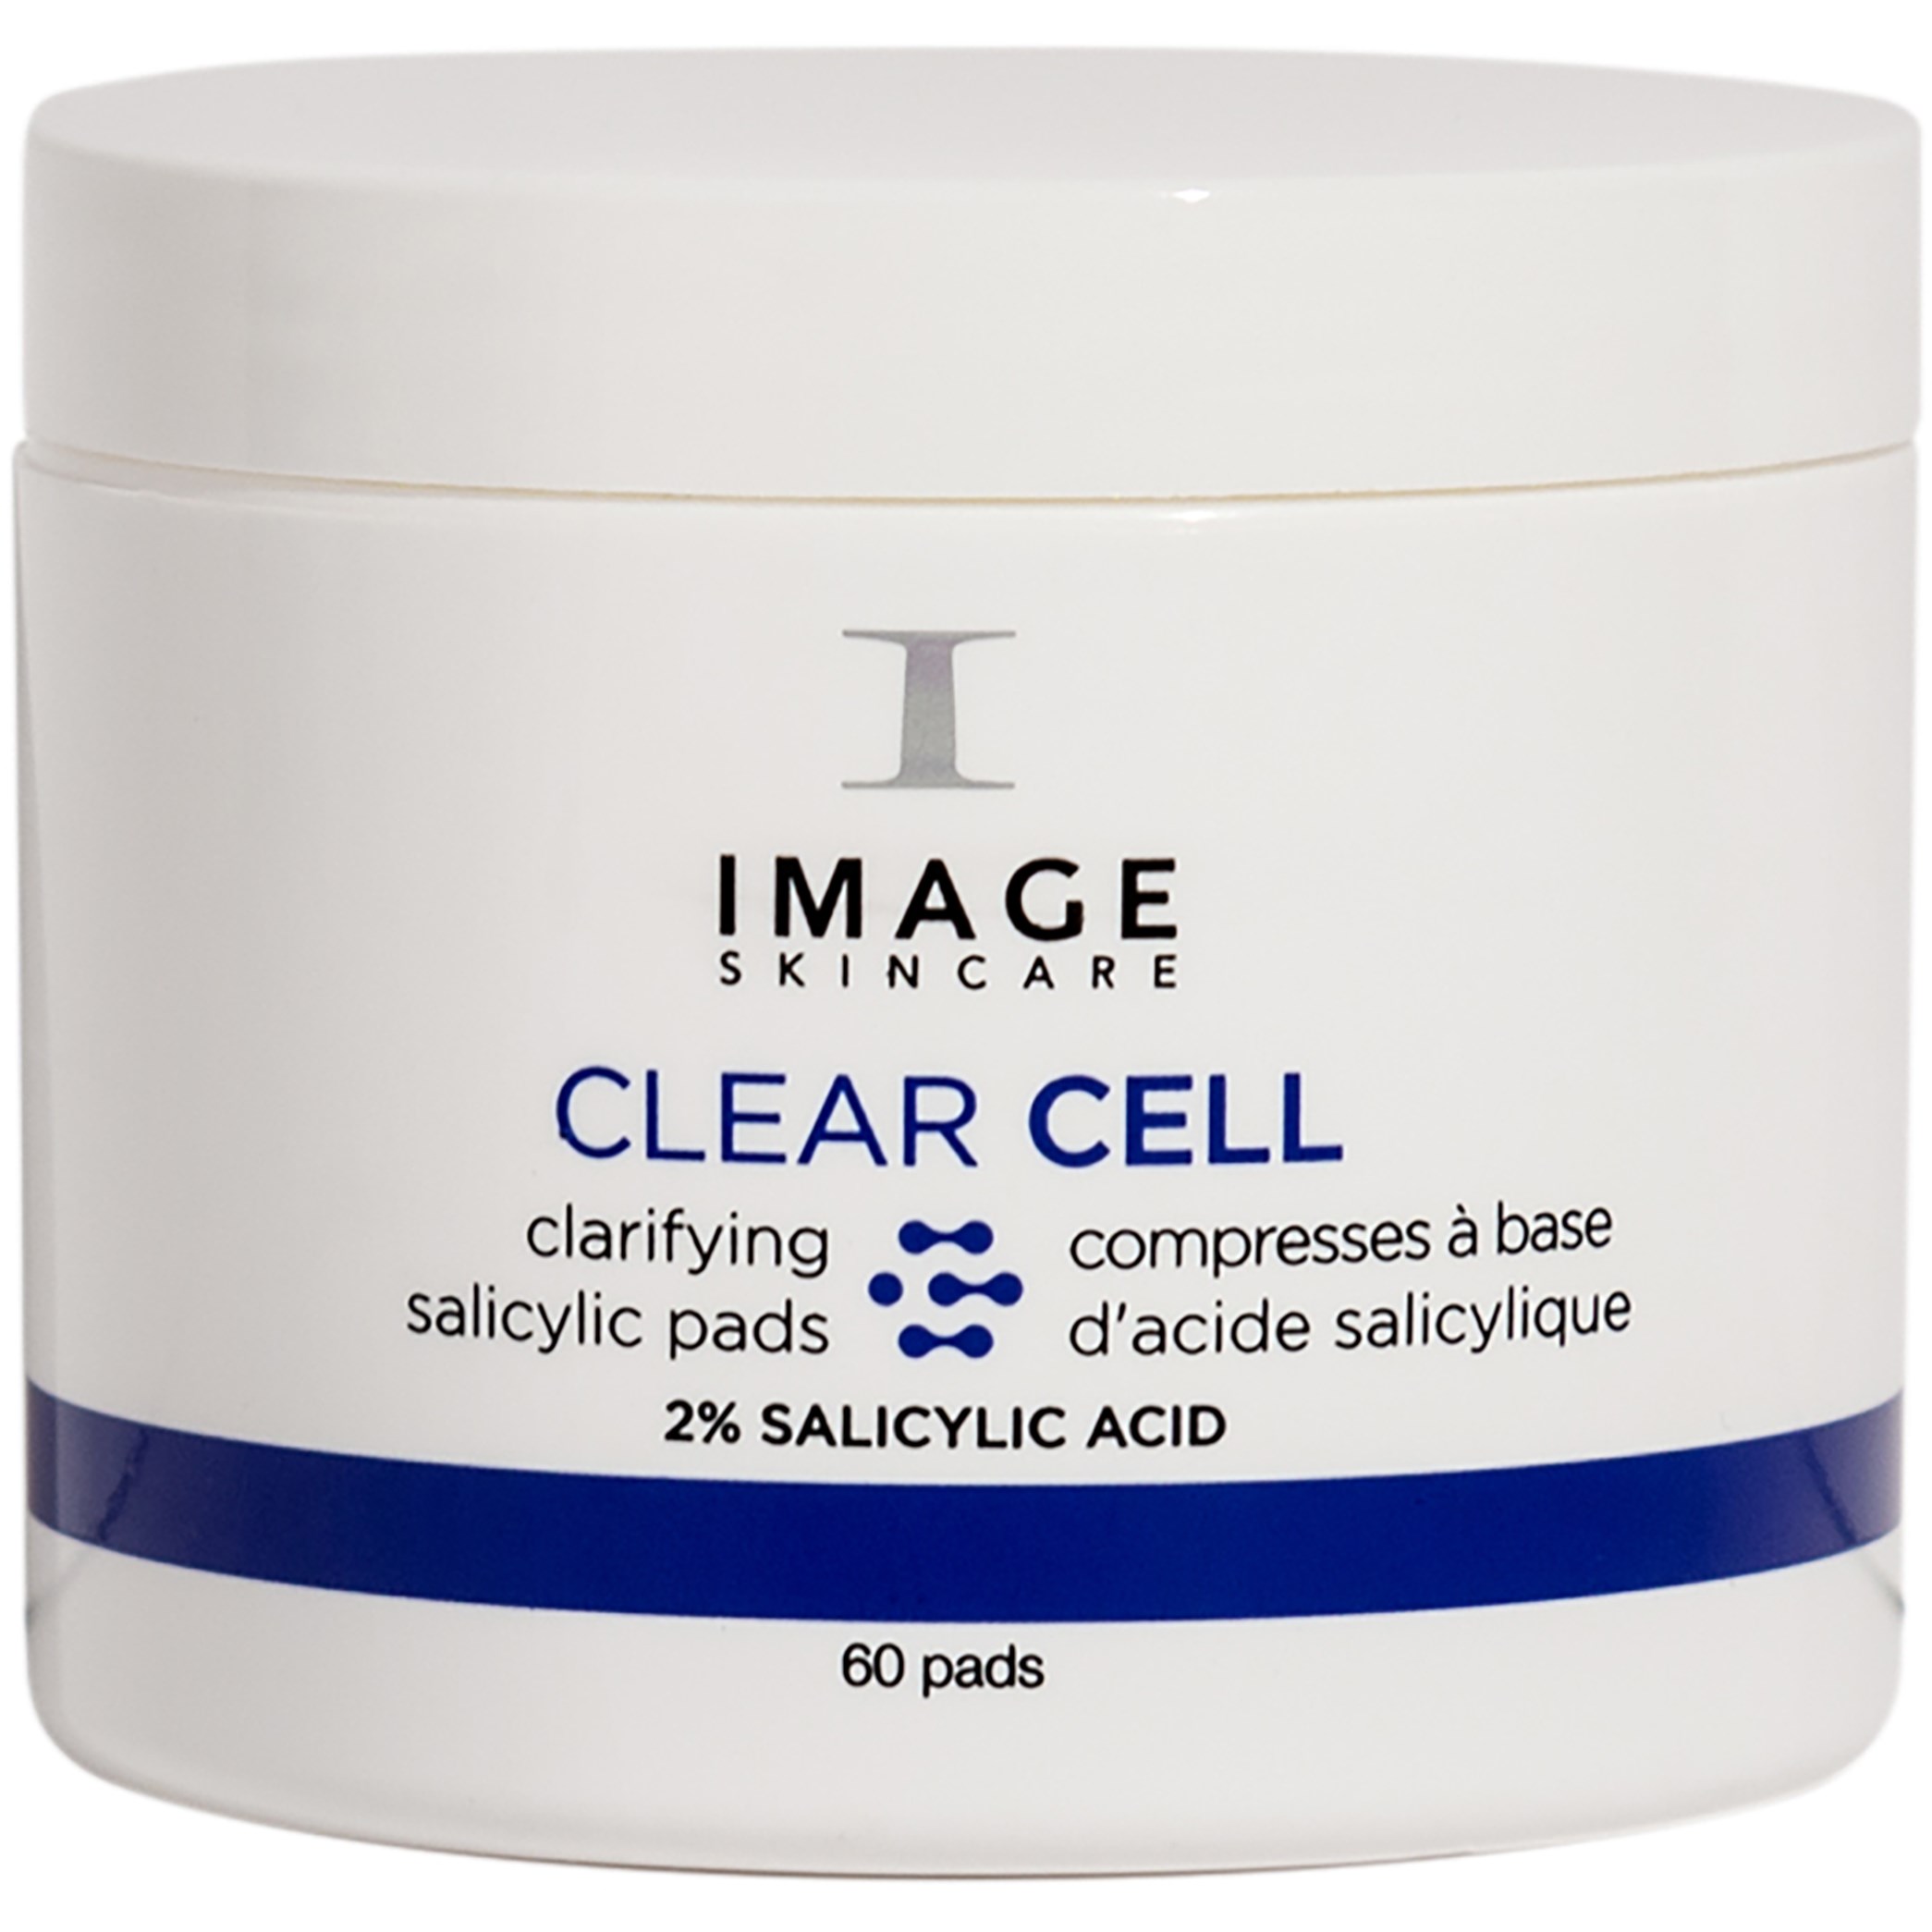 Läs mer om IMAGE Skincare Clear Cell Salicylic Clarifying Pads 60 st